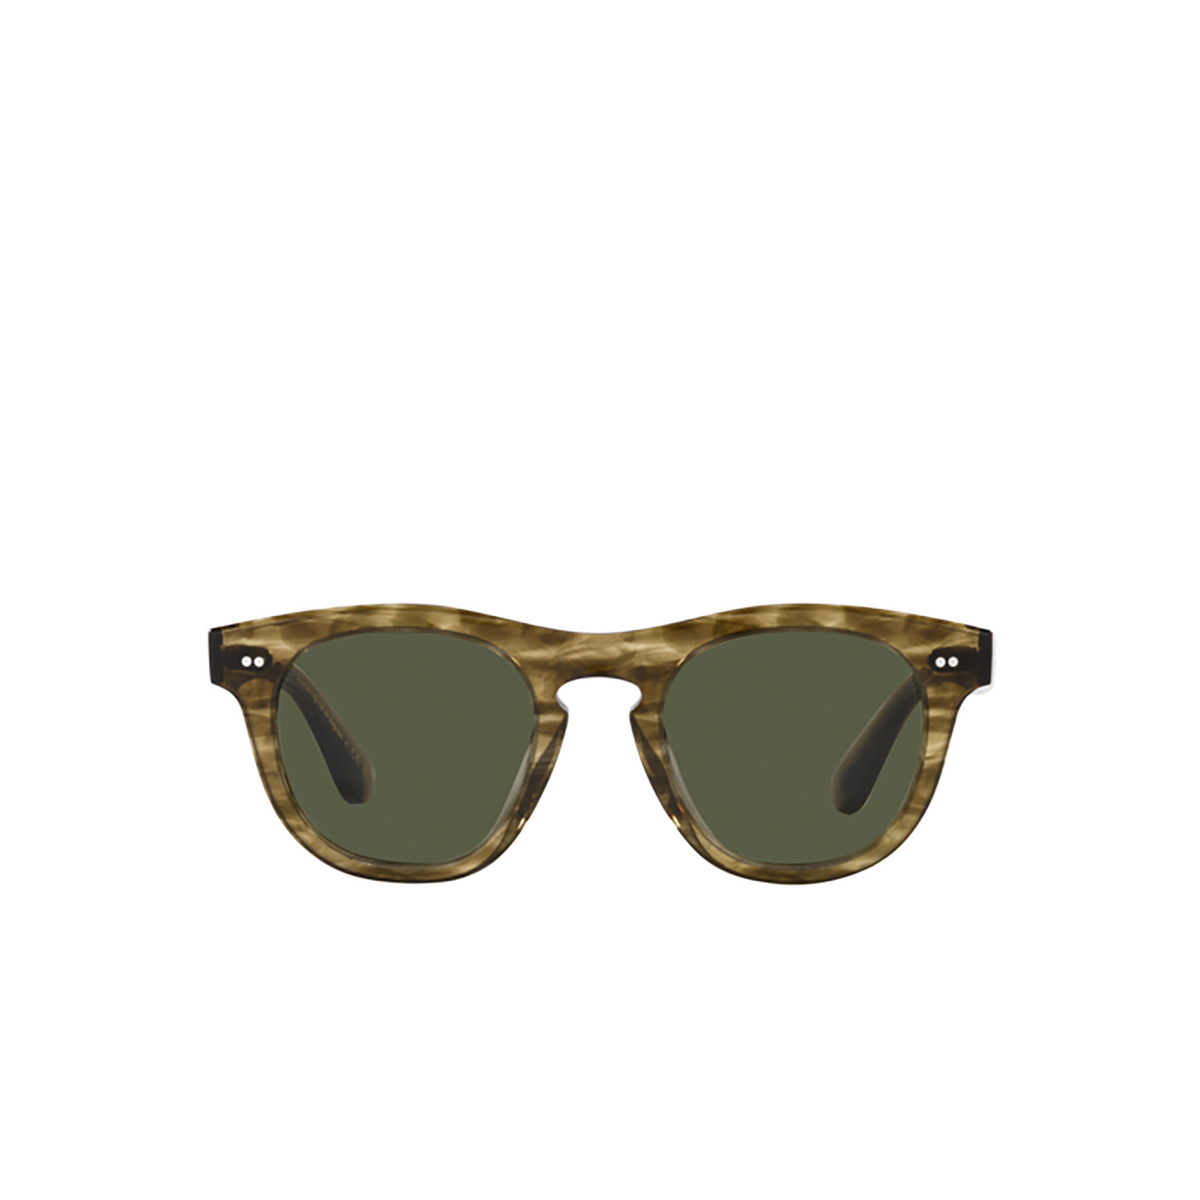 Oliver Peoples RORKE Sunglasses 173552 Soft Olive Gradient - front view